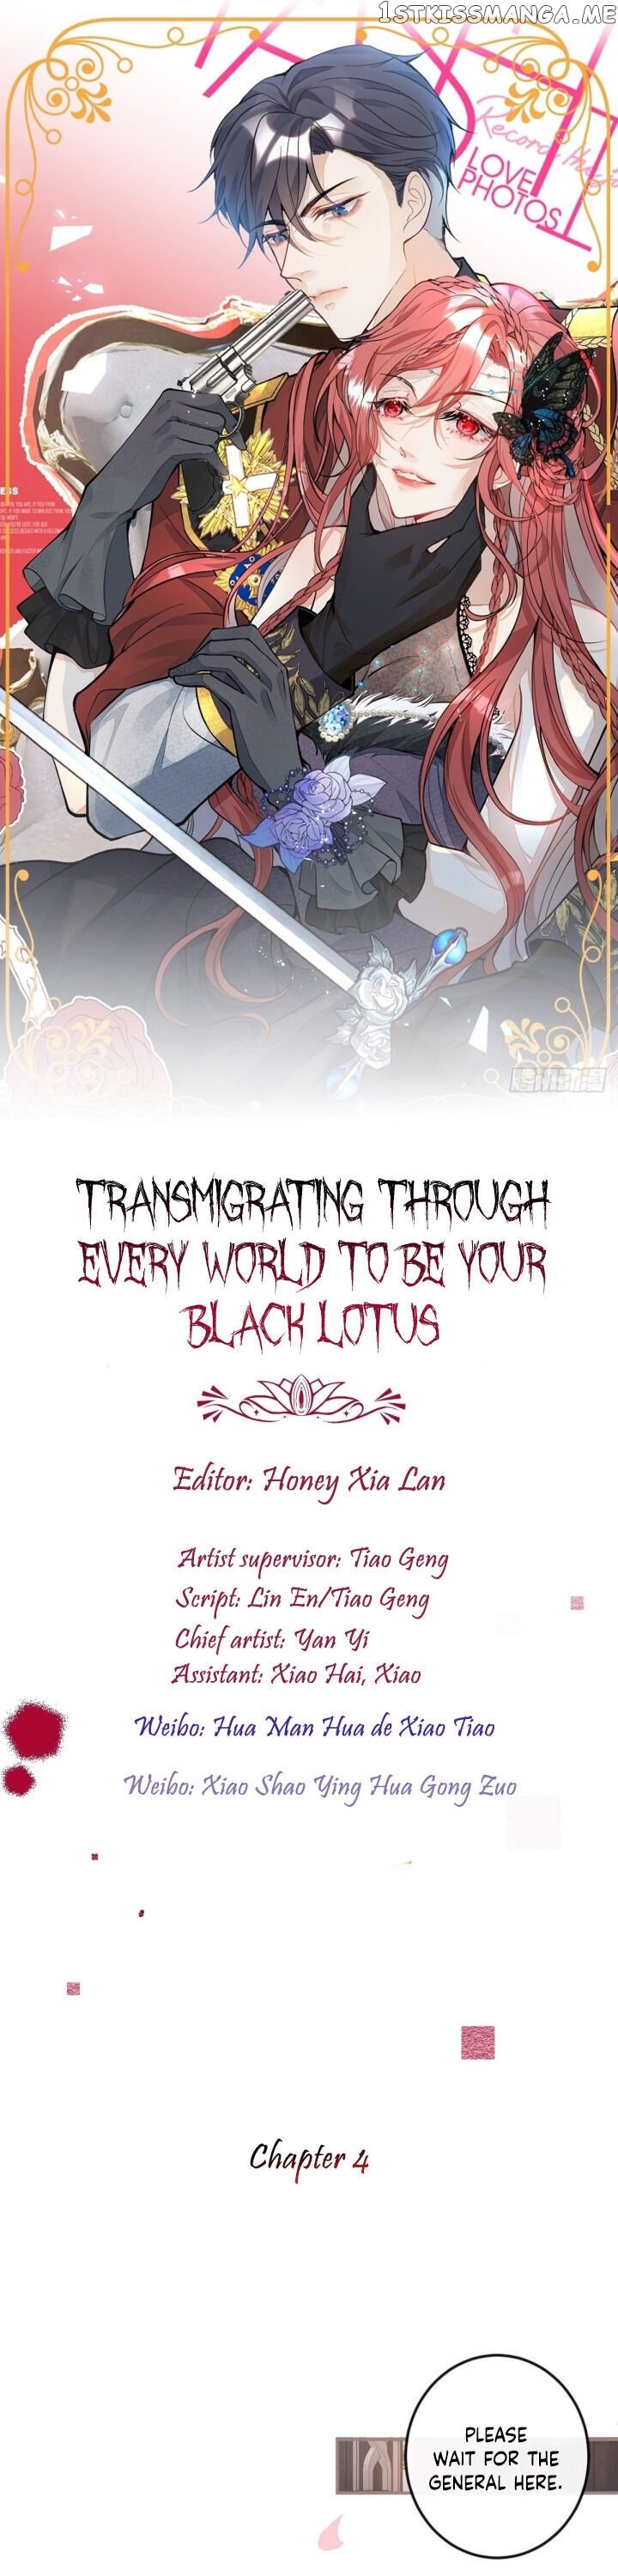 Transmigrating Through Every World To Be Your Black Lotus chapter 4